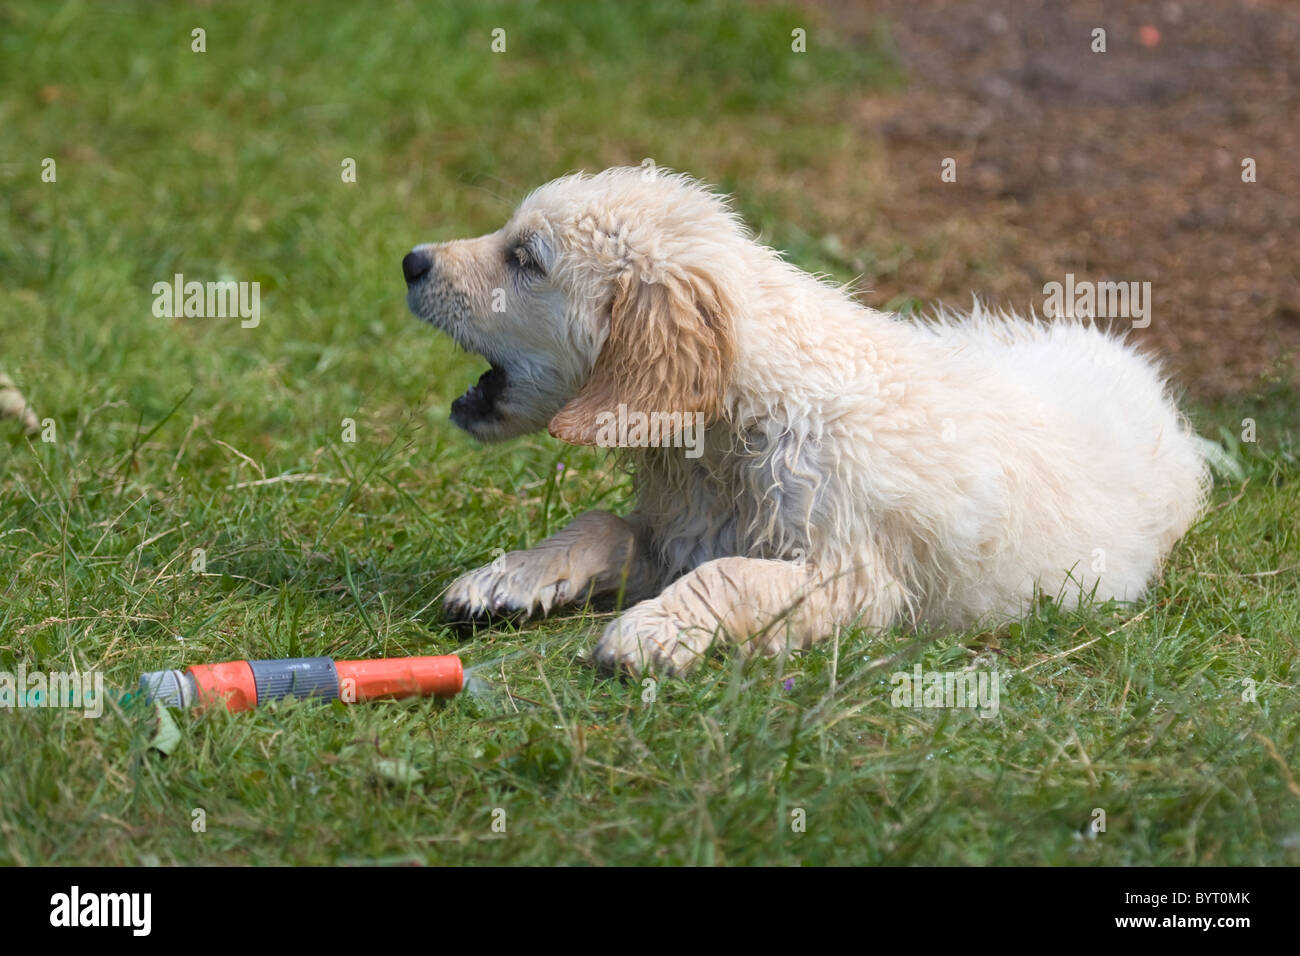 Wet Golden Retriever puppy plays with a hosepipe Stock Photo